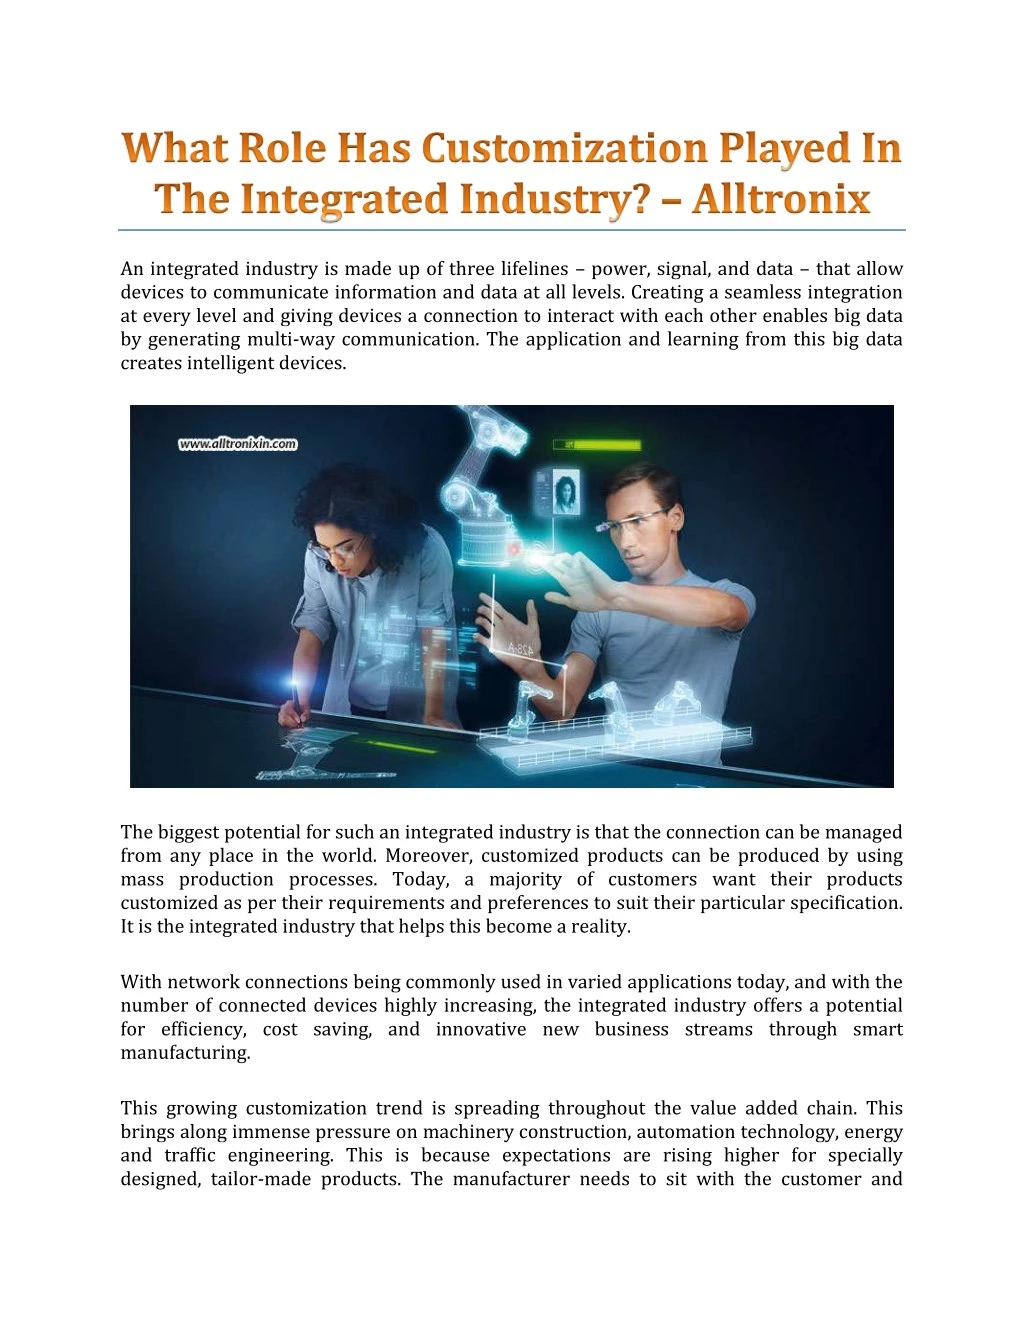 an integrated industry is made up of three